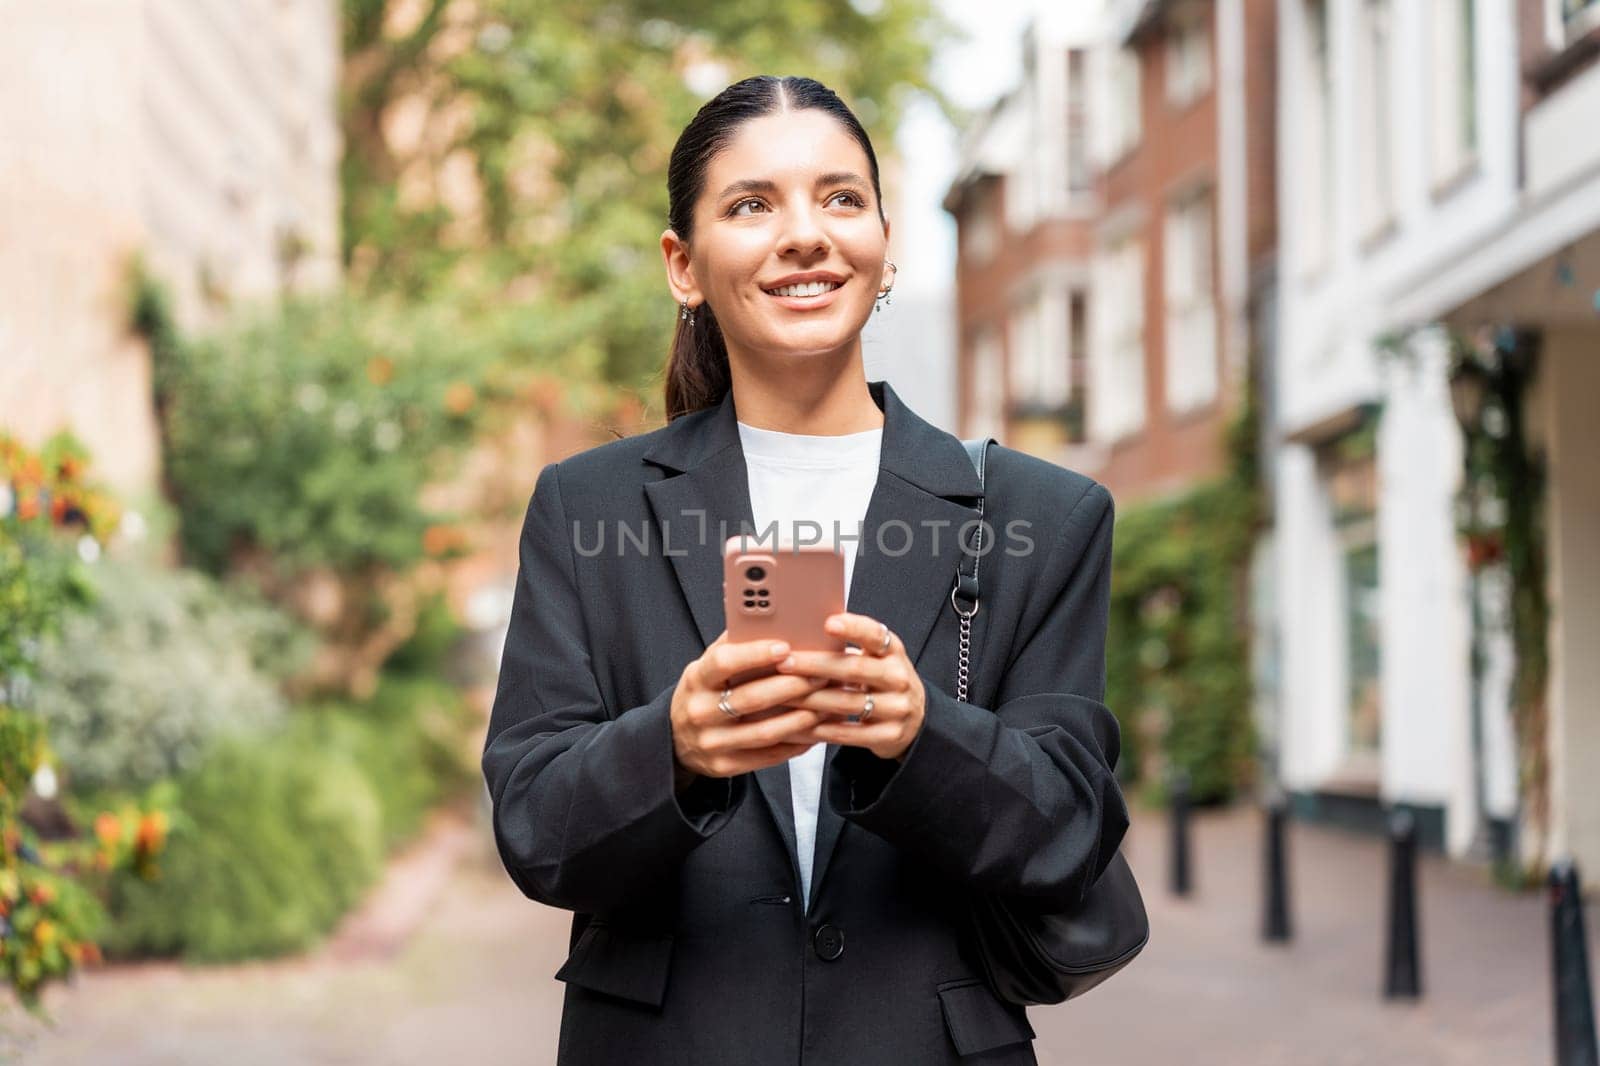 Sunny portrait of a newly entrepreneur young woman in her 25s, black suit, holding a phone smiling, looking away.